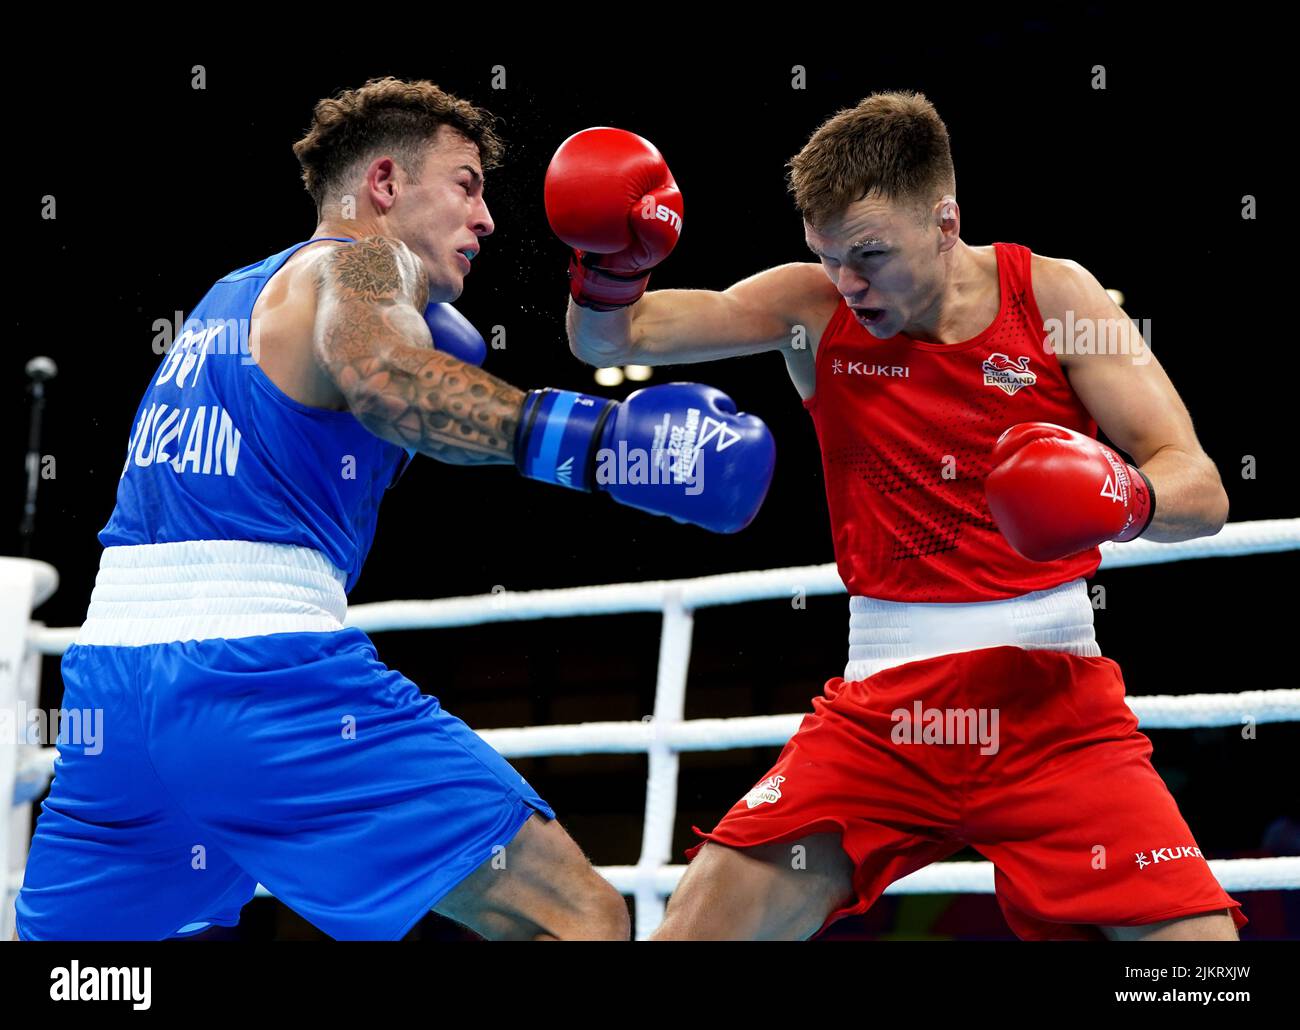 England's Lewis Richardson (right) and Guernsey's Billy le Poullain during the Men's Over 71kg-75kg (Middleweight) - Quarter-Final 1 at The NEC on day six of the 2022 Commonwealth Games in Birmingham. Picture date: Wednesday August 3, 2022. Stock Photo